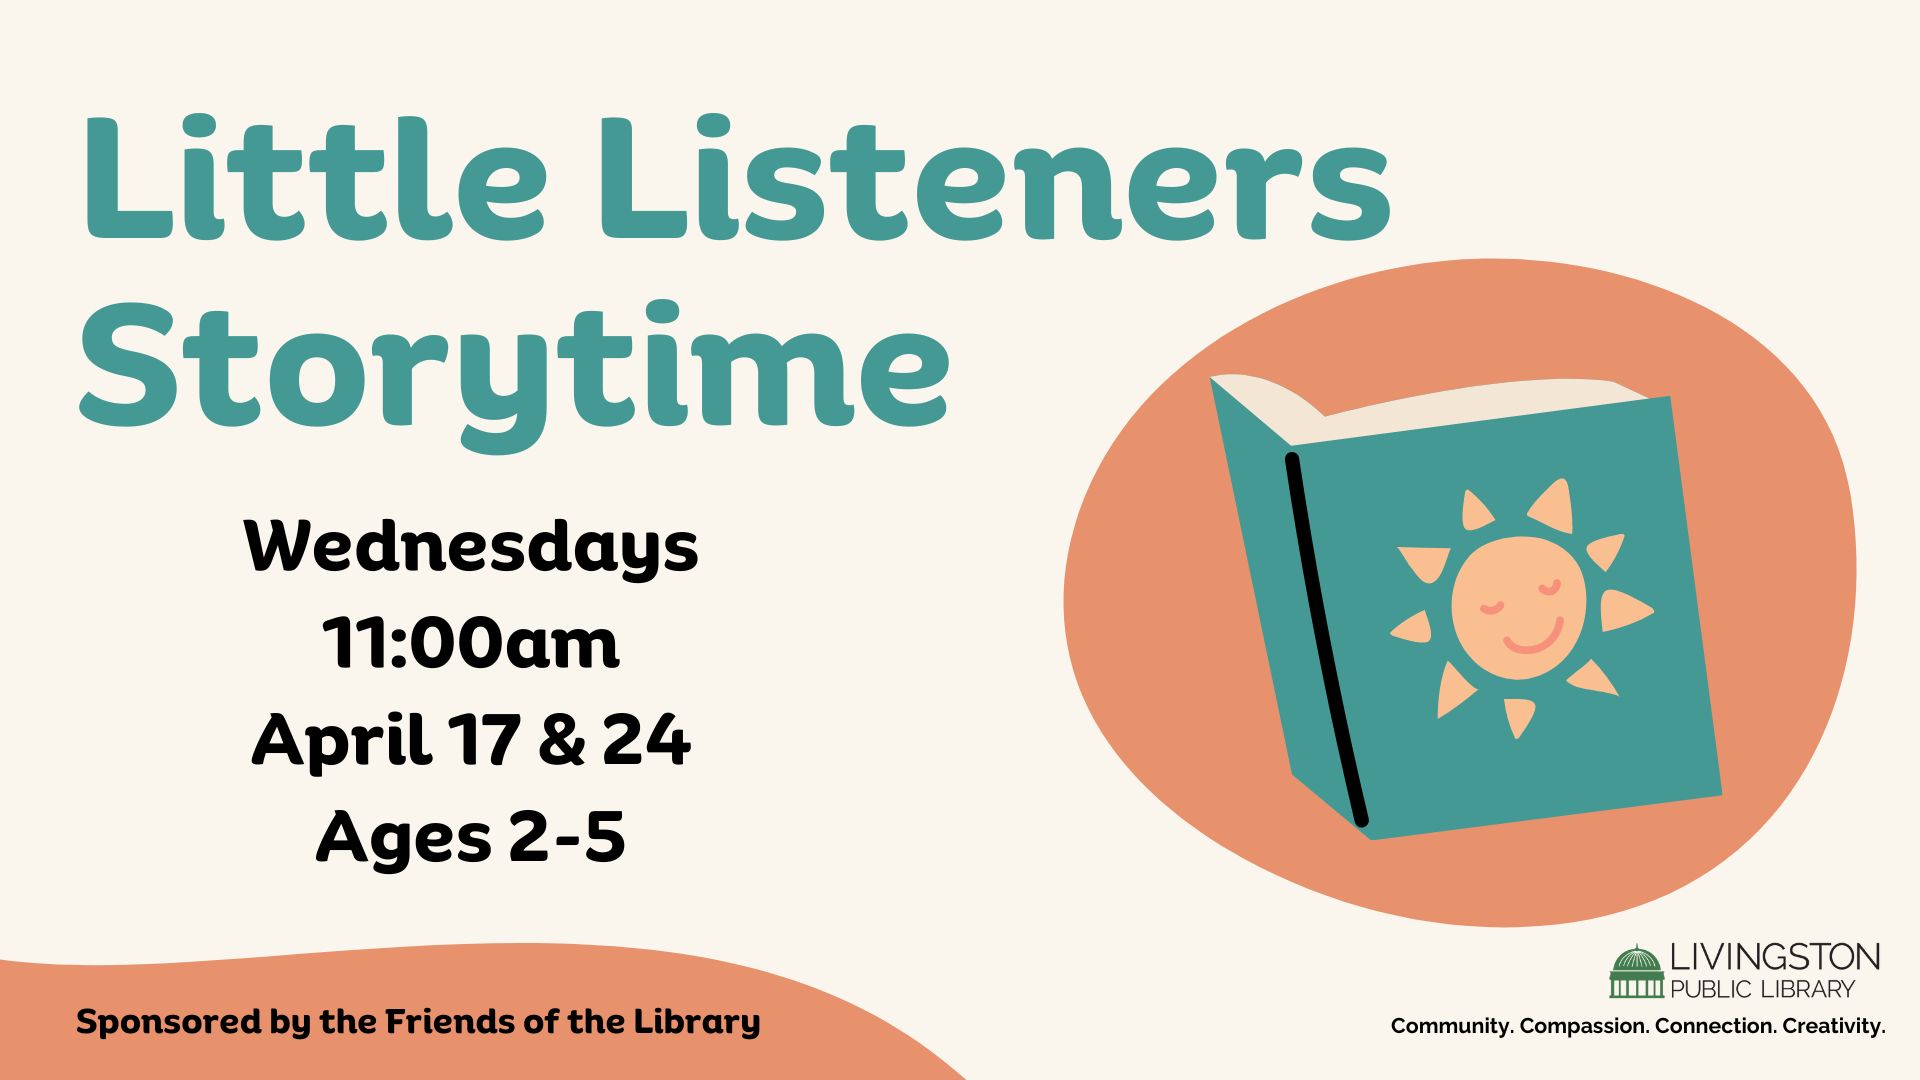 Little Listeners Storytime. Wednesdays, 11:00am, April 17 & 24, Ages 2-5. Livingston logo. Tagline: Community. Compassion. Connection. Creativity. Sponsored by the Friends of the Library.